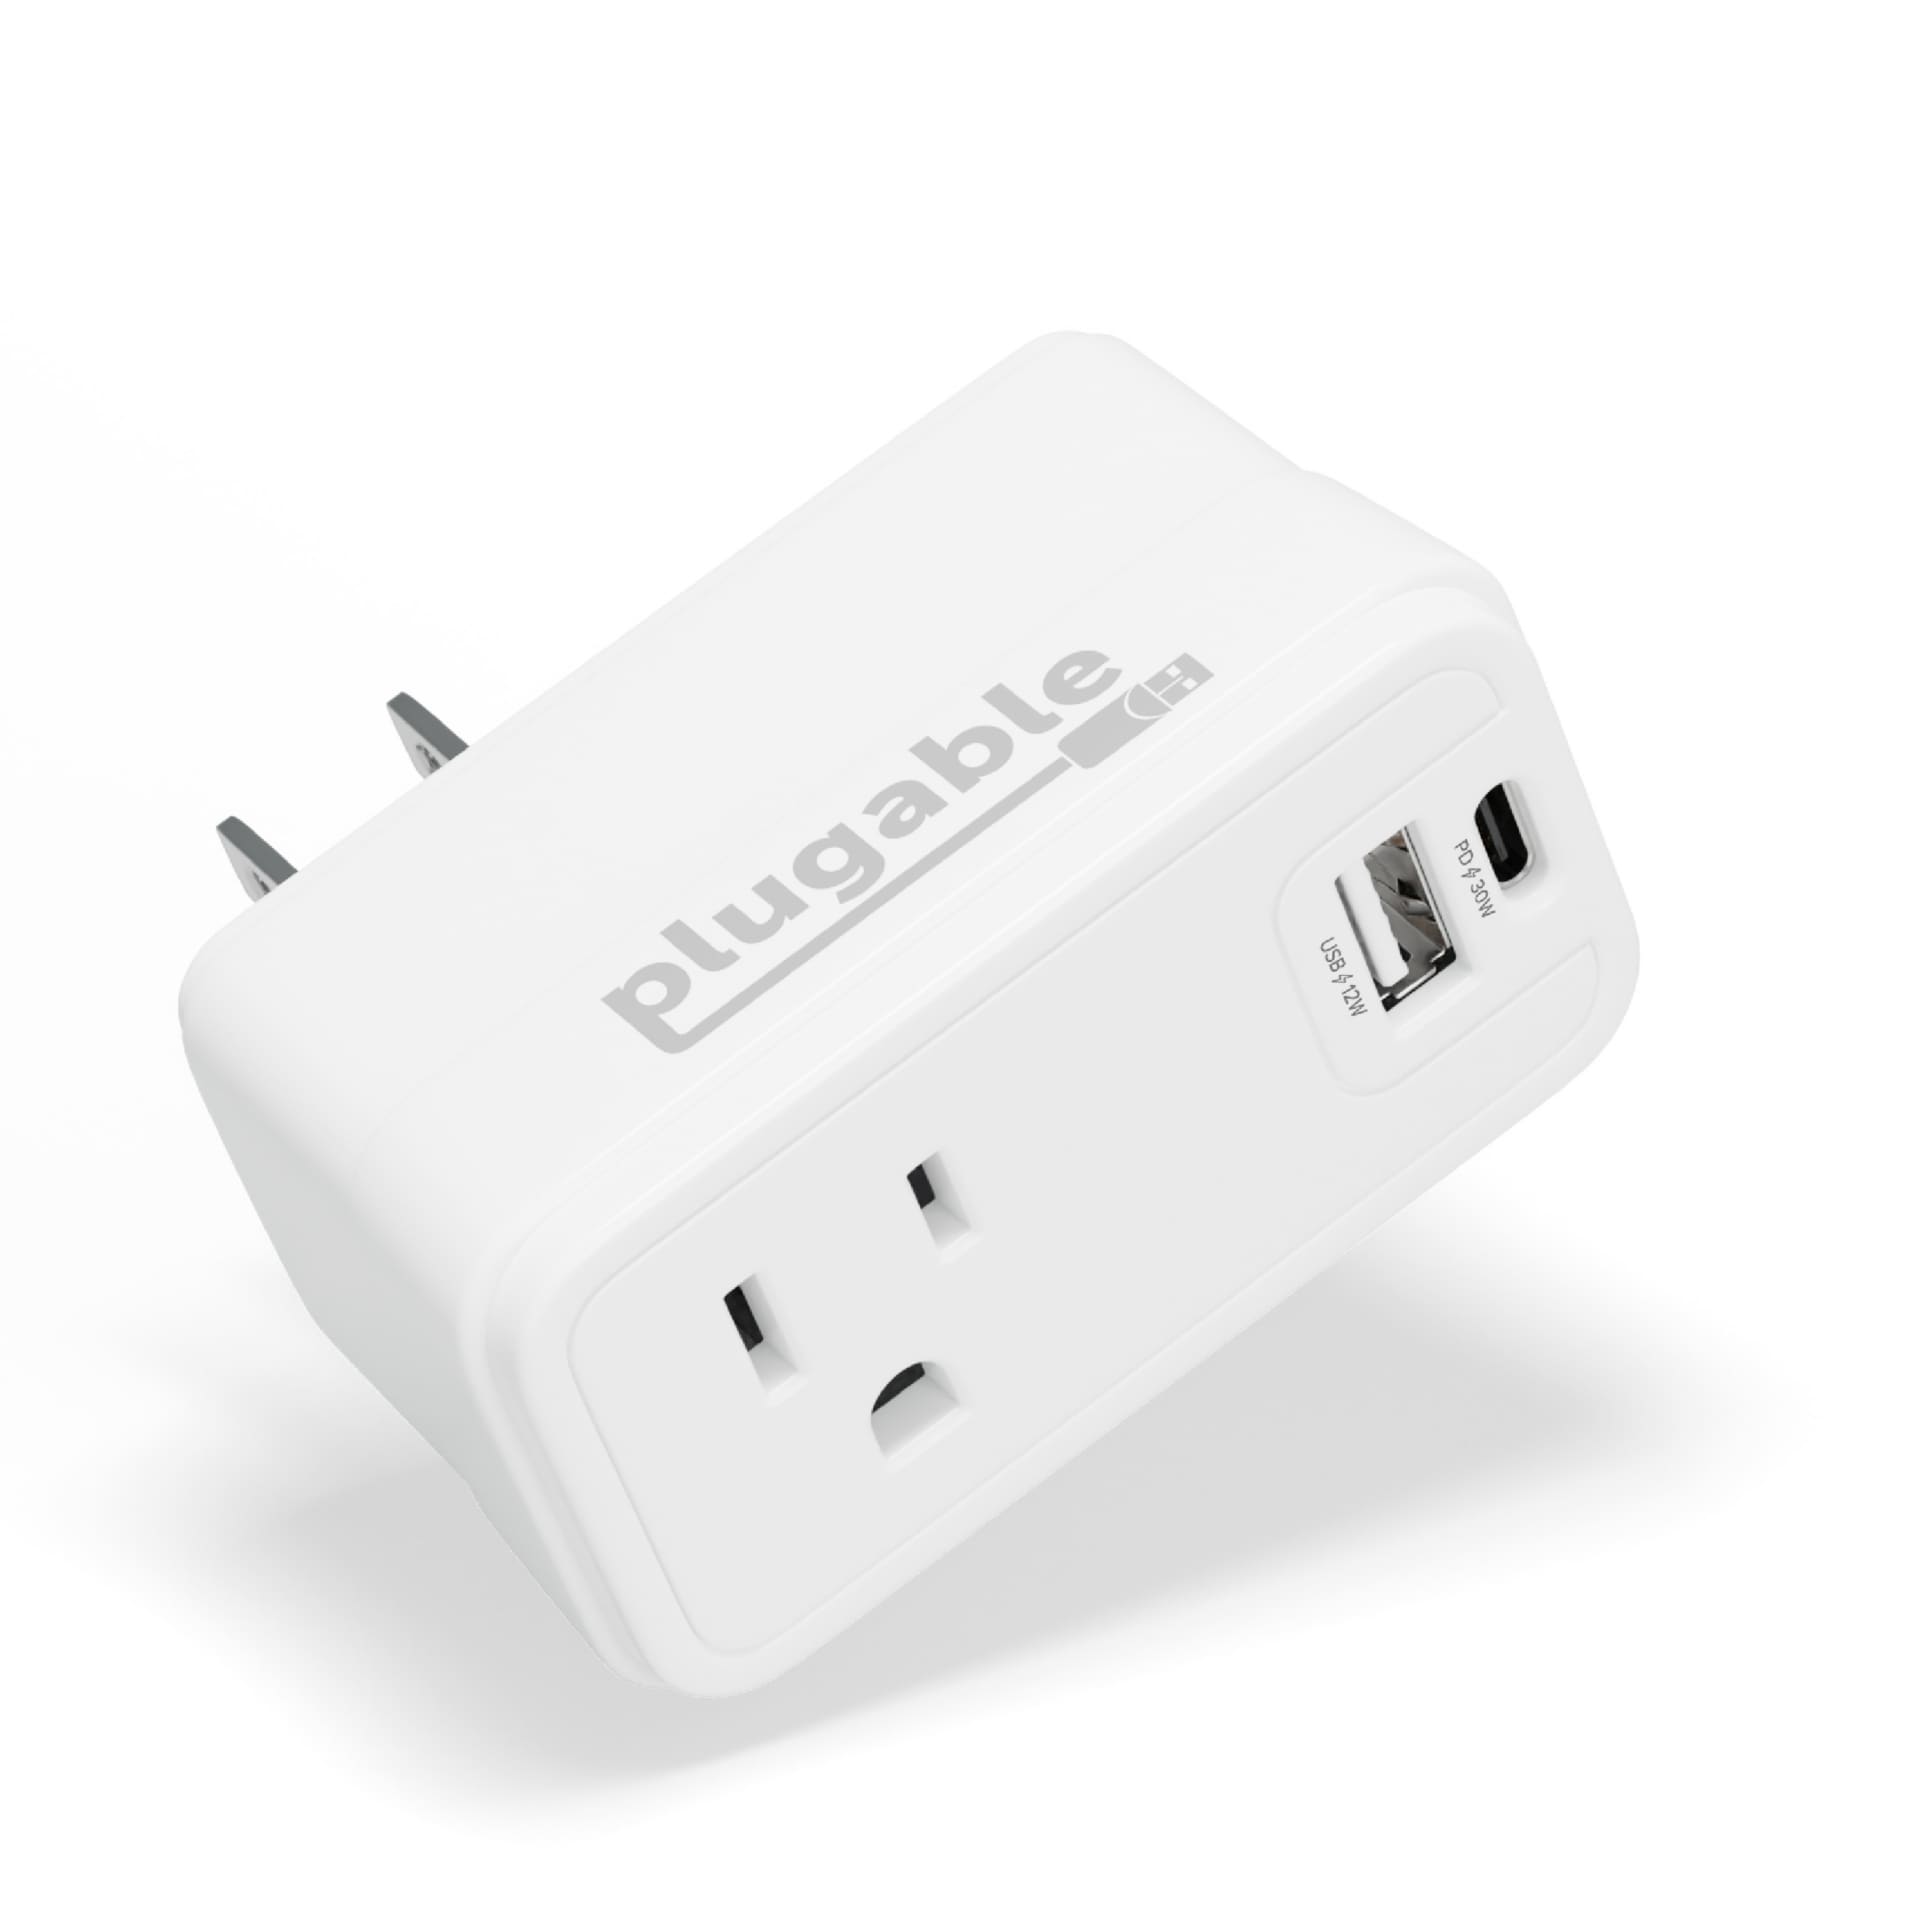 Plugable Wall Outlet Extender with 1x USB-C and 1x USB, 32W USB C Charger Block, USBC Fast Charger for Travel, Office